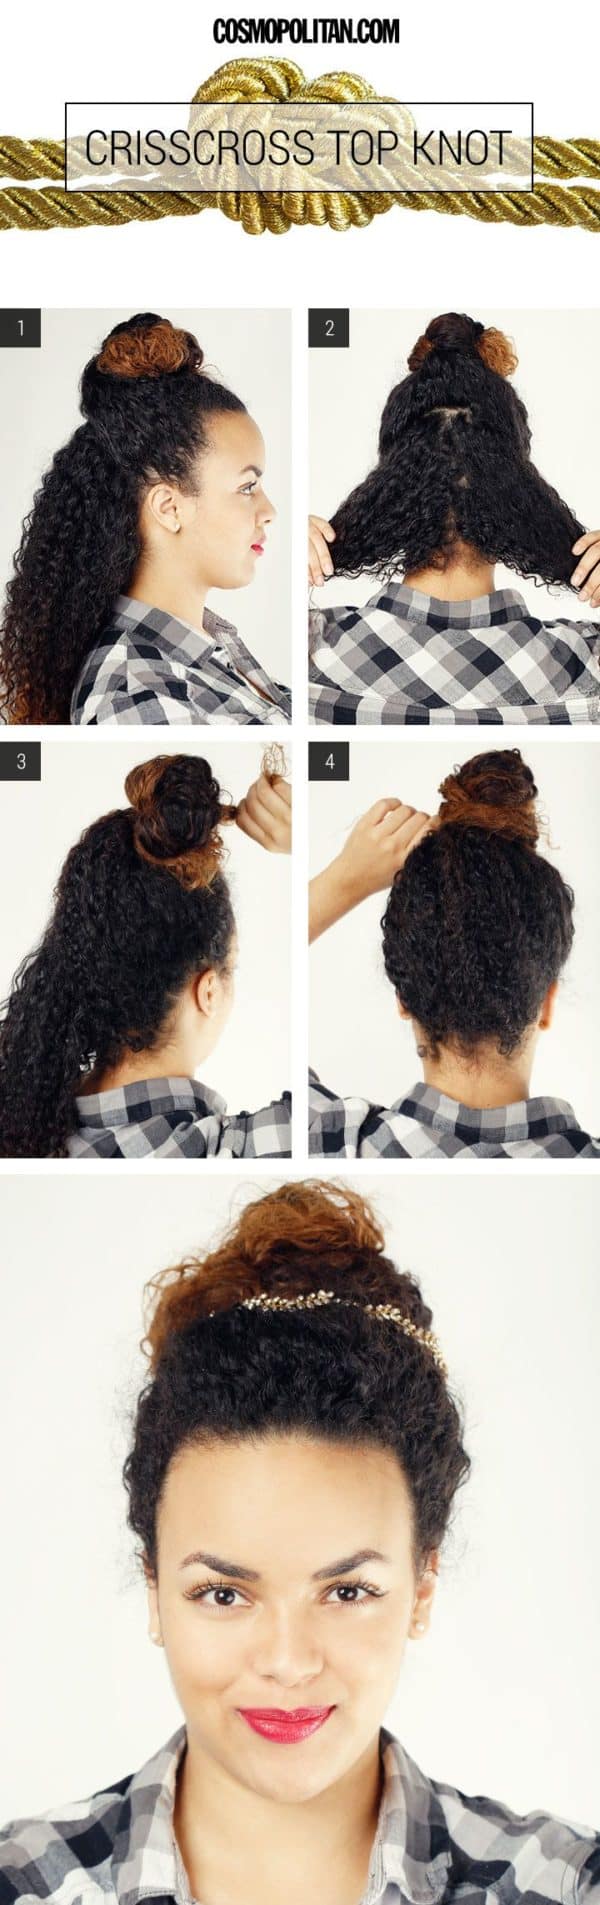 Fantastic Curly Hairstyle Tutorials That You Have To Check Out Now